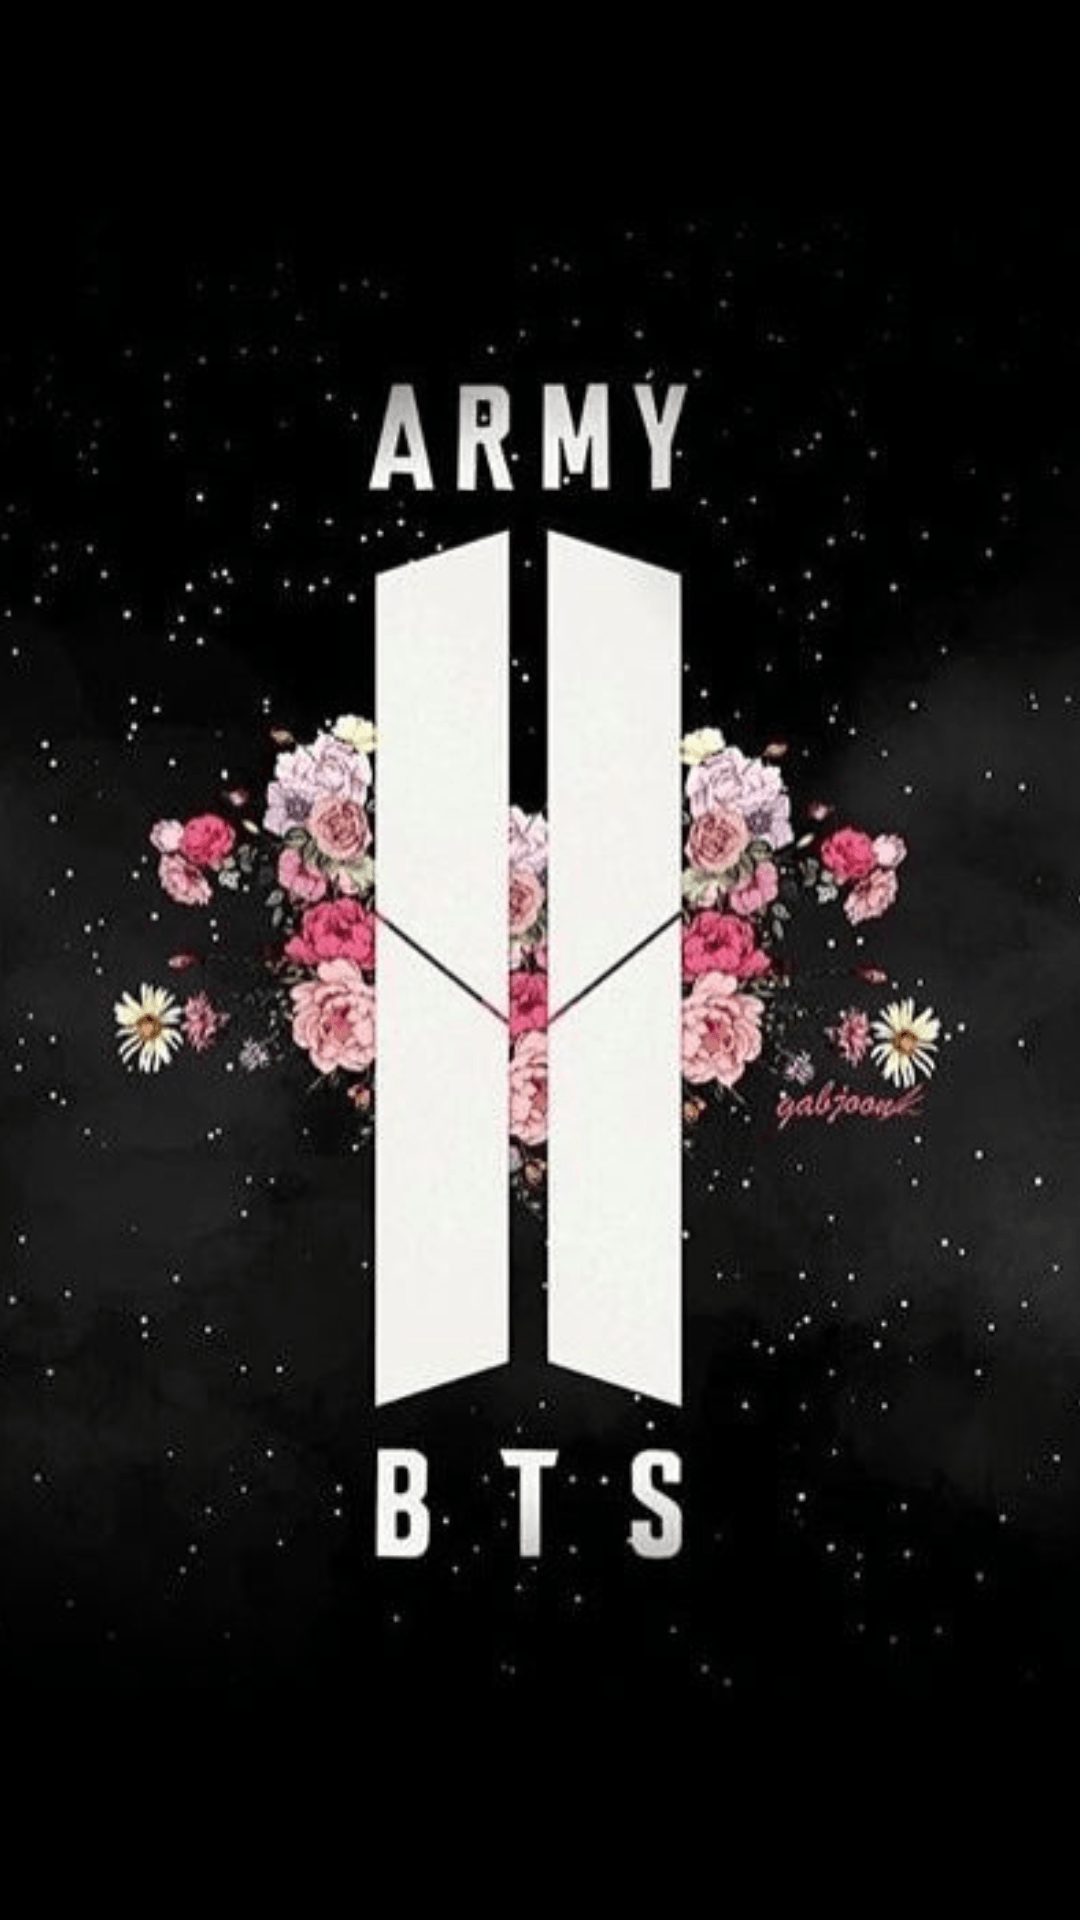 Aesthetic army bts